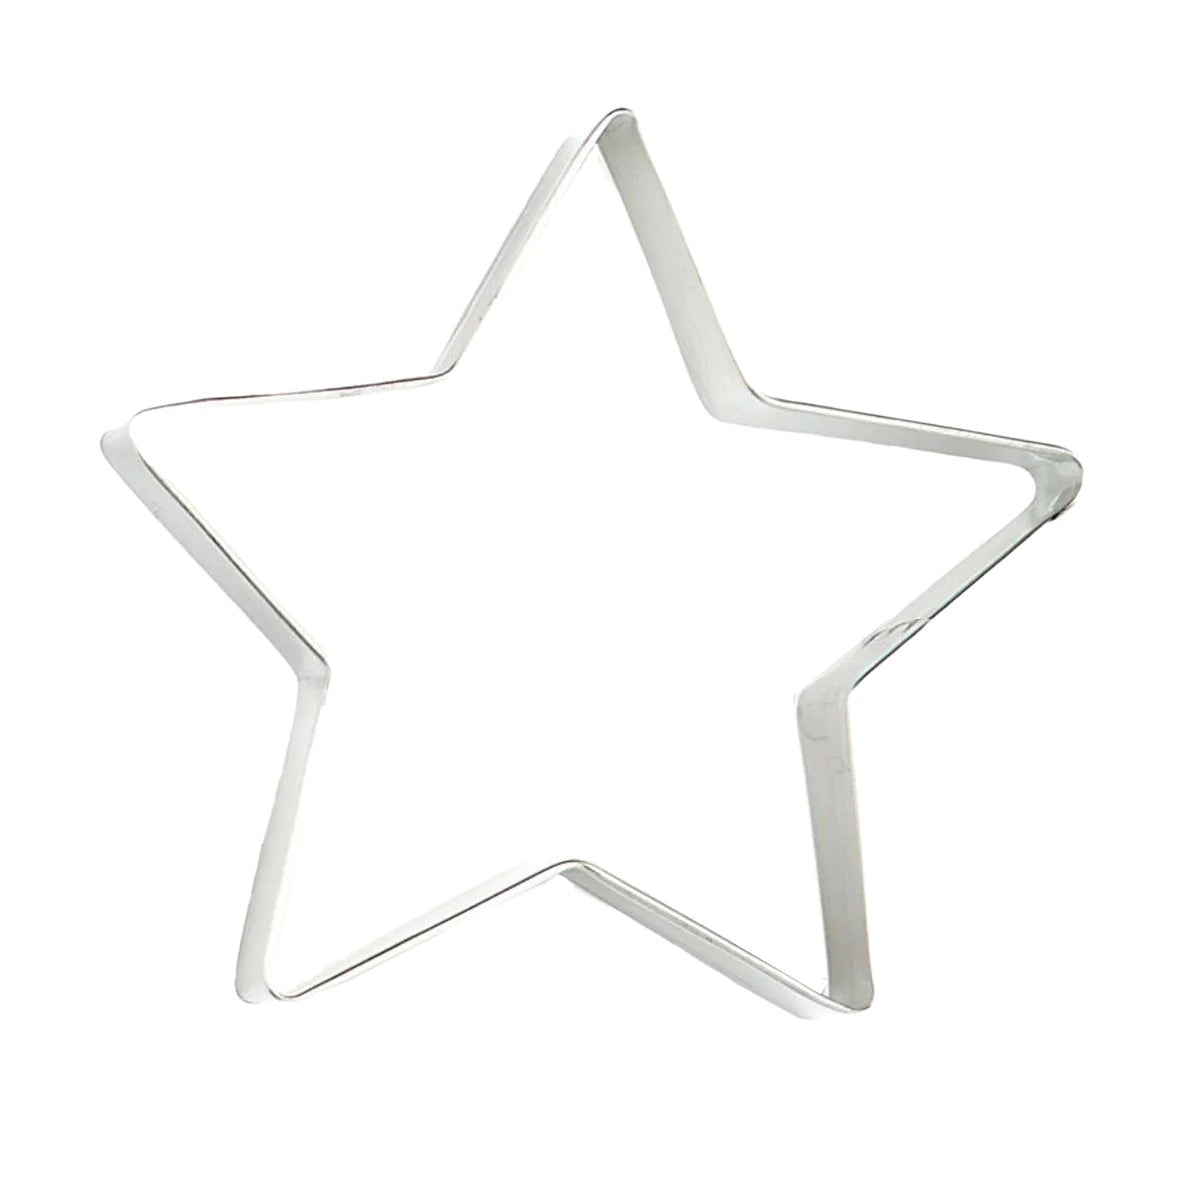 Giant Cookie Cutter – Star